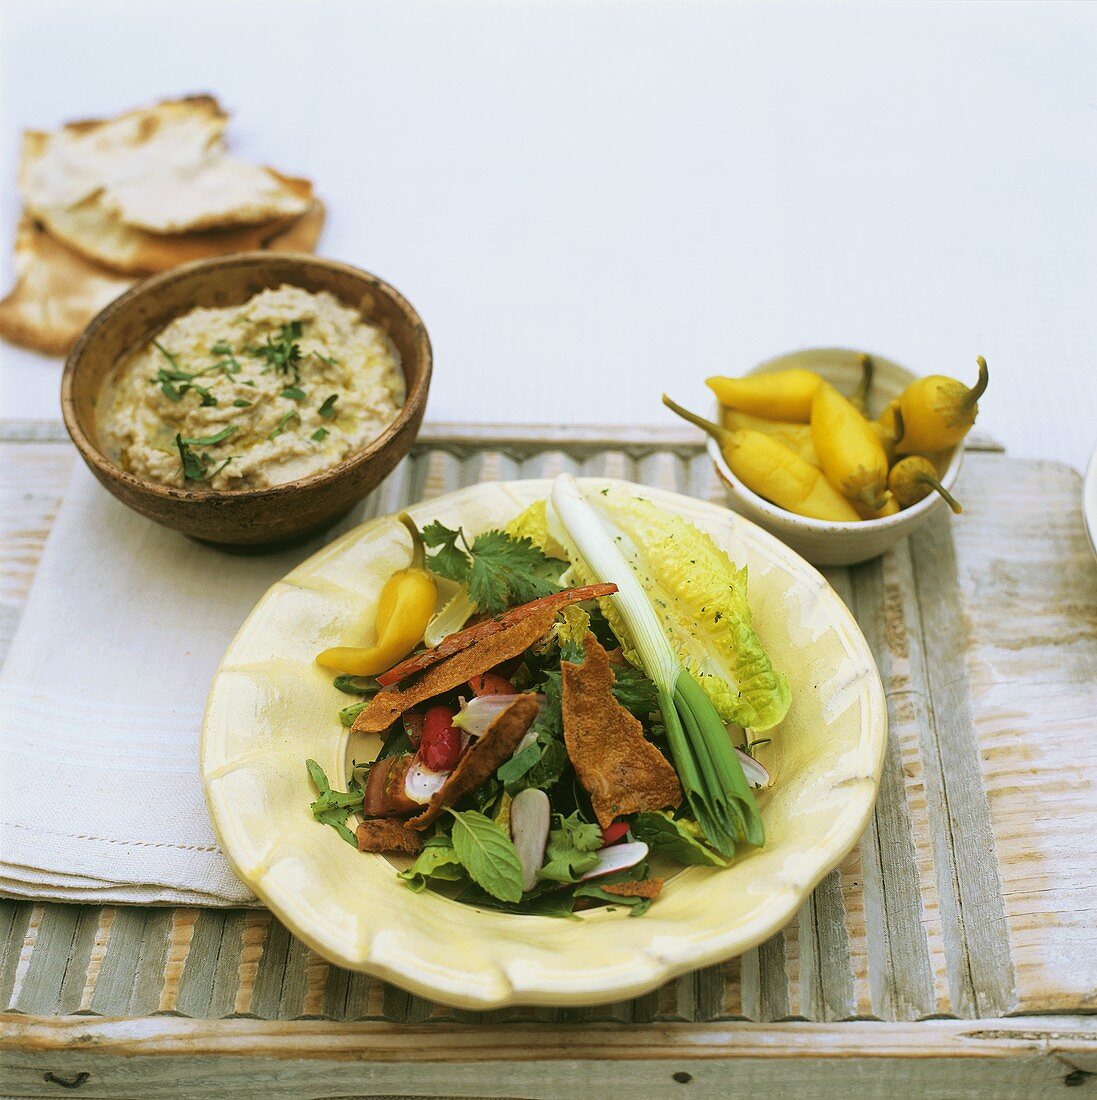 Mixed salad, pickled chillies and chick-pea dip